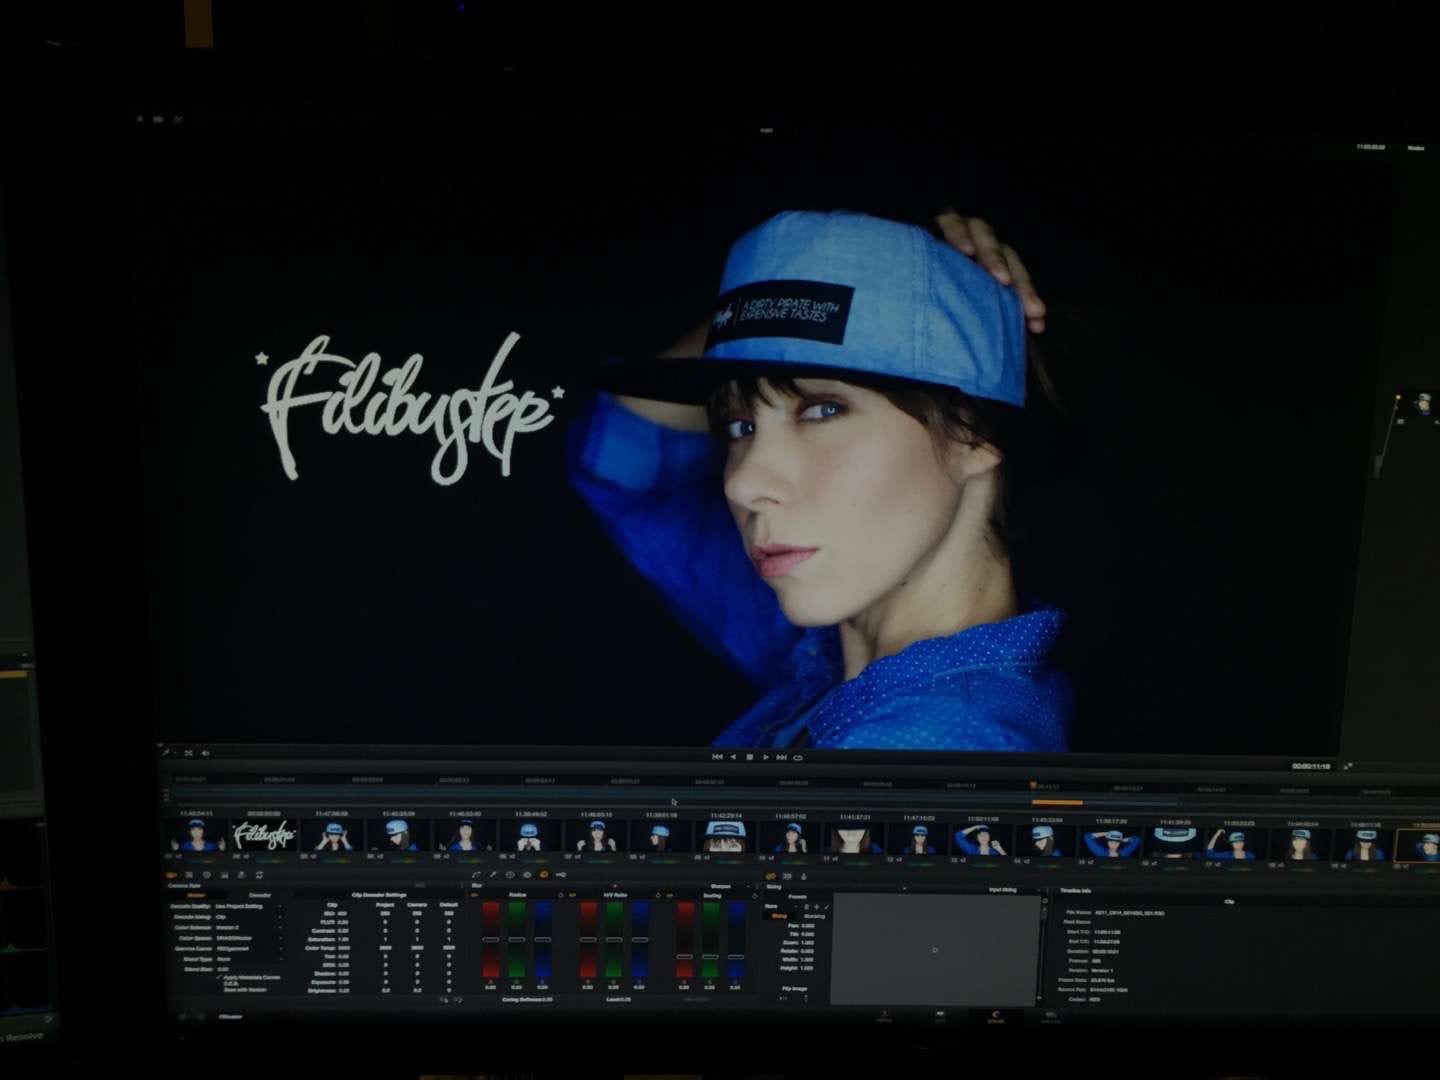 IU C&I Studio Portfolio Filibuster Apparel Video display of white logo with woman with long brown hair in a blue shirt wearing a light blue hat with black rim